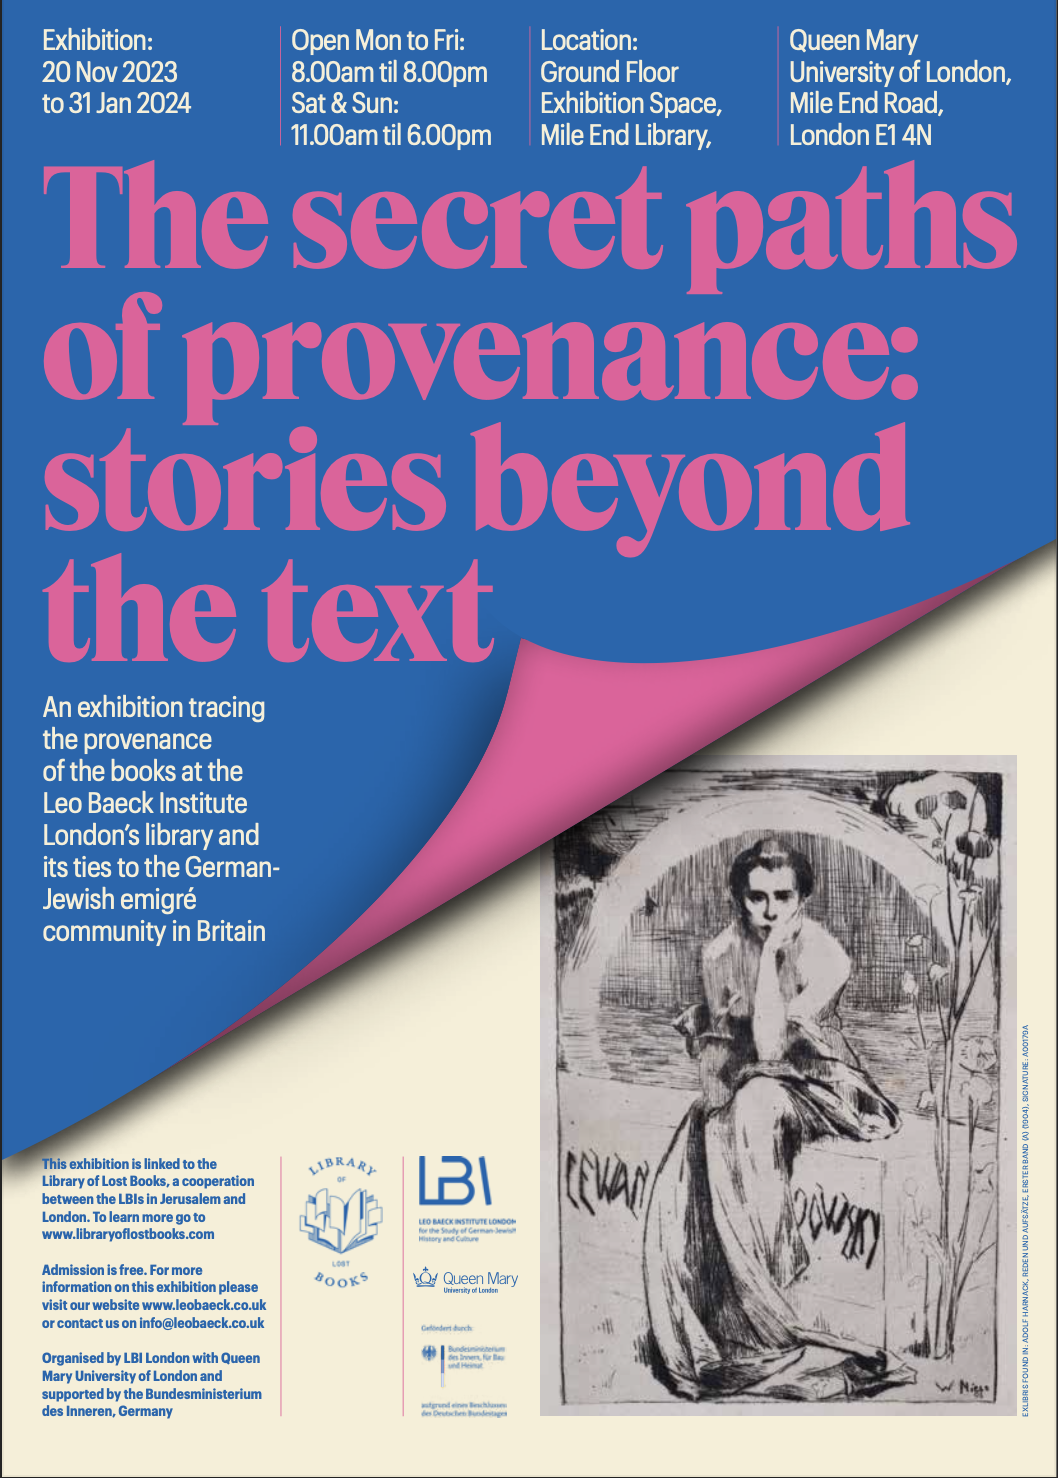 Secret paths of provenance: Stories beyond the text